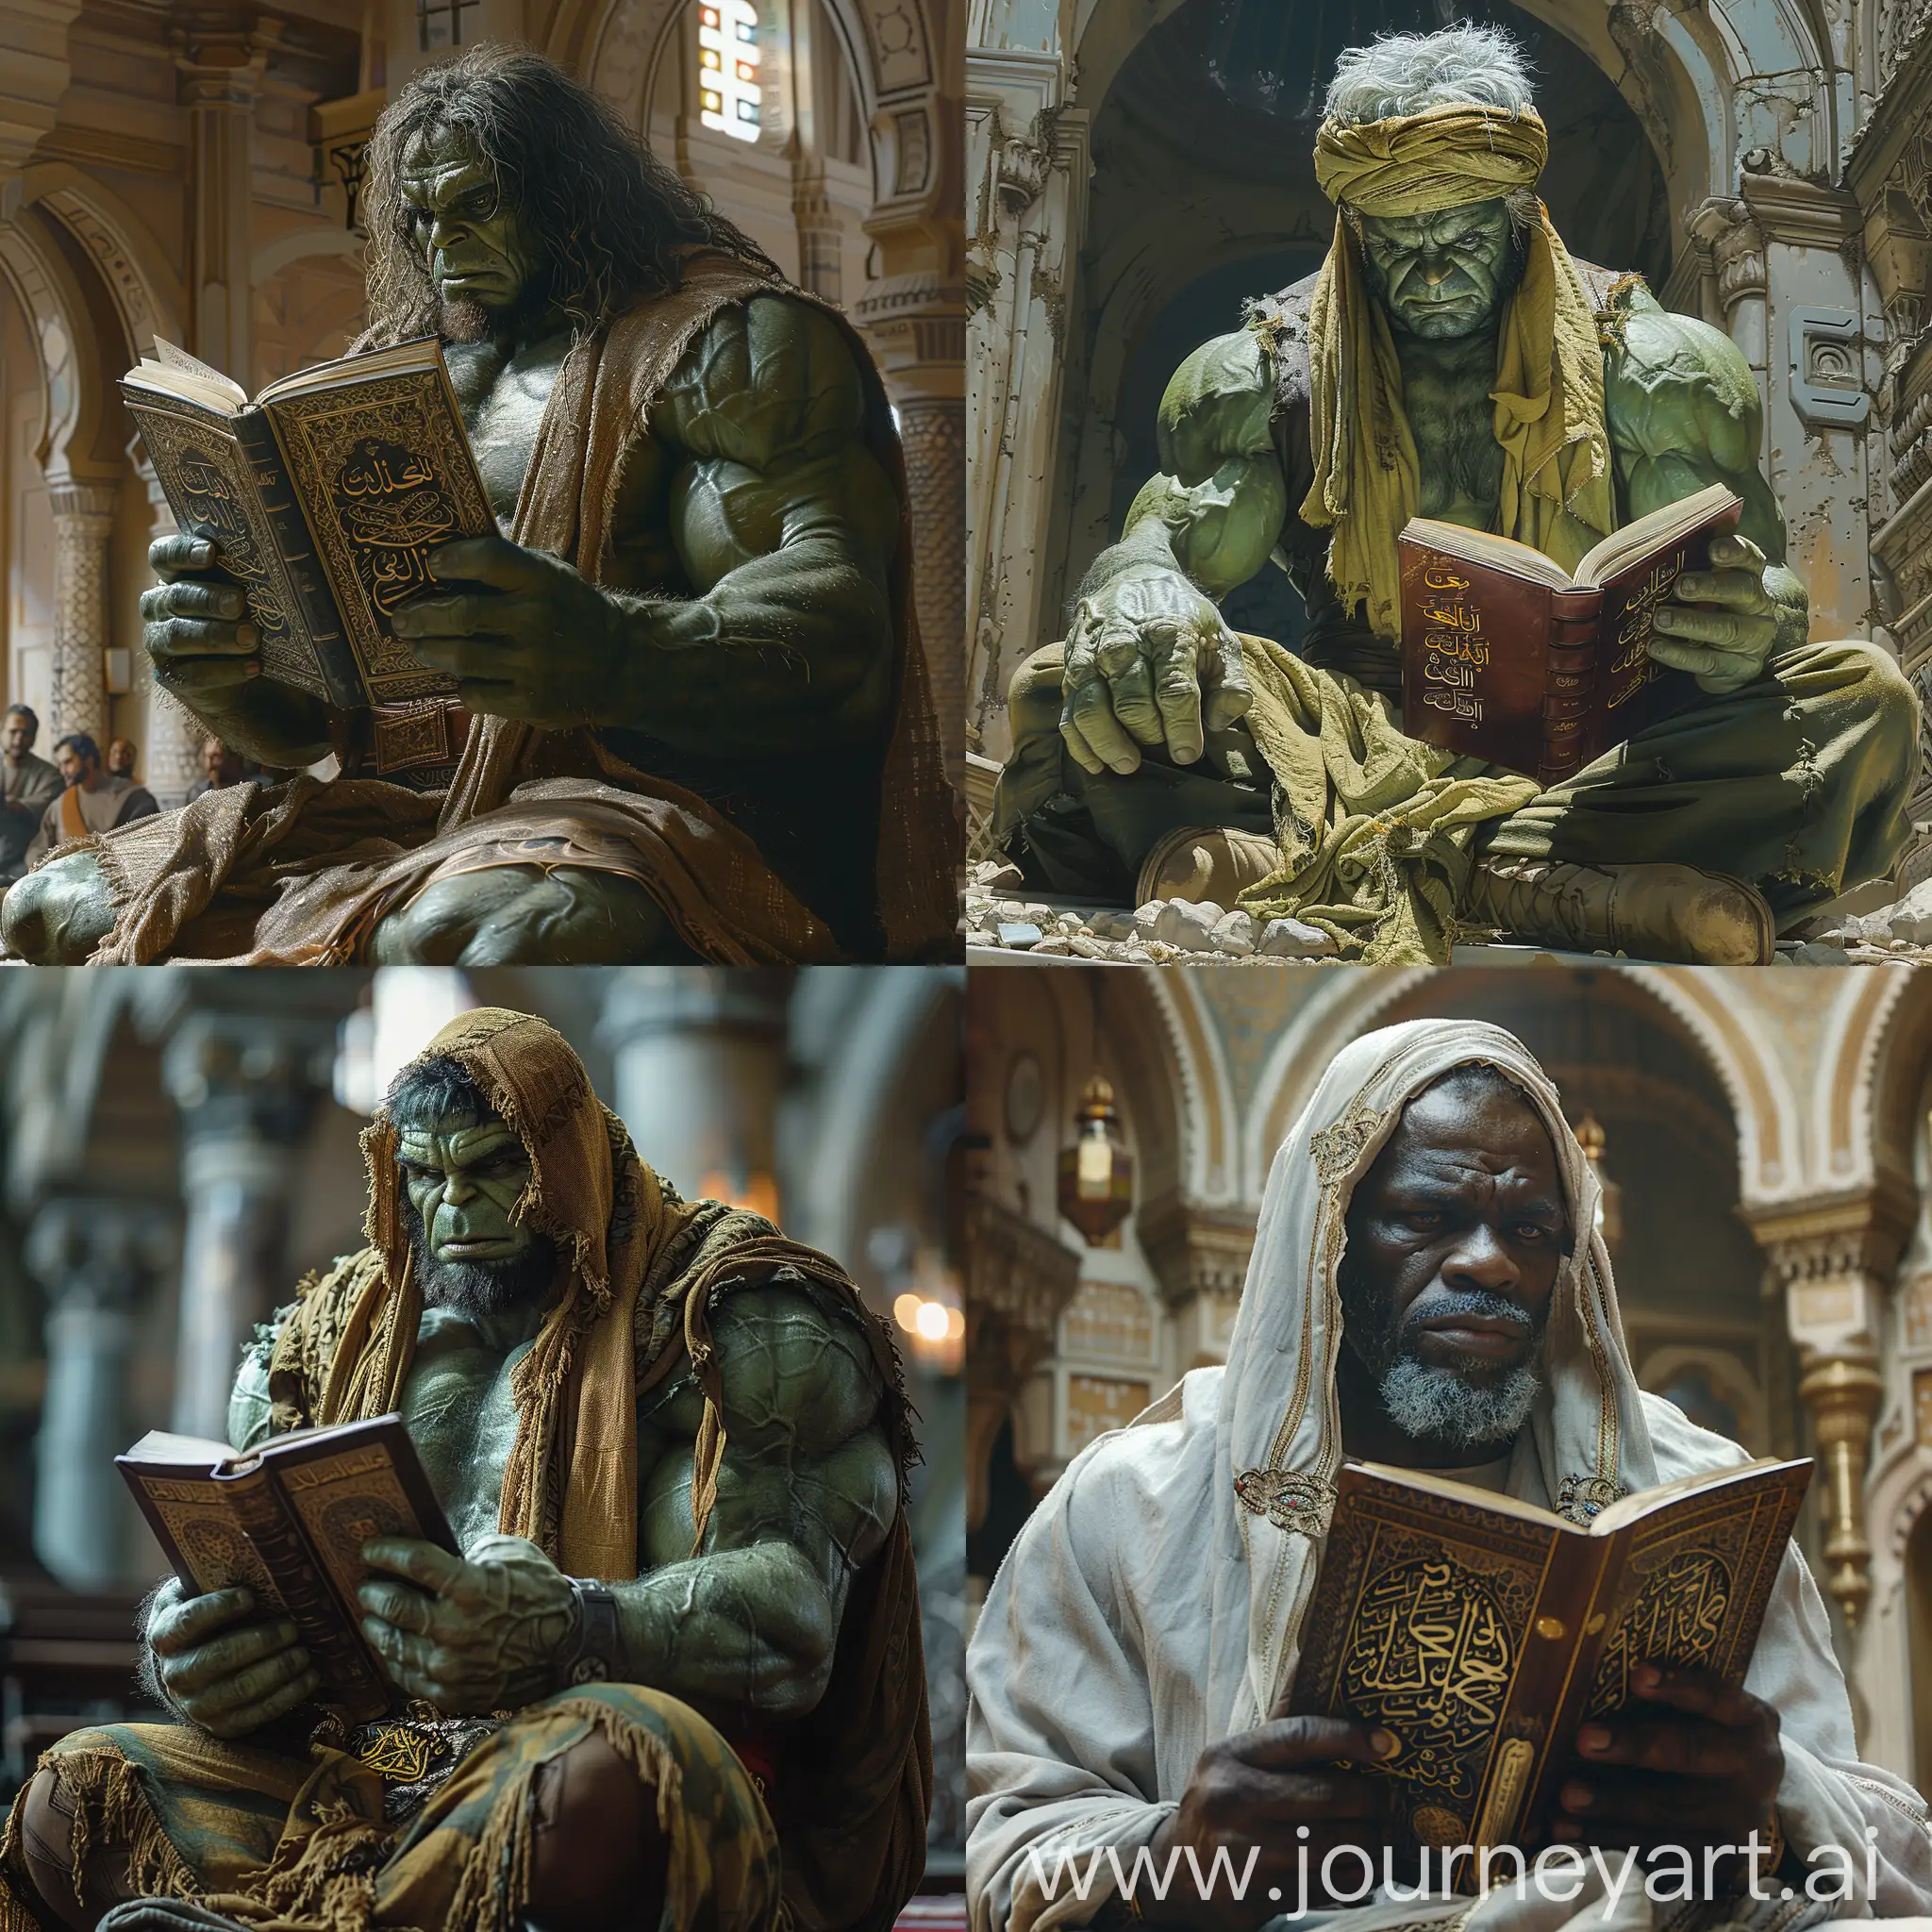 the hulk Muslim wearing Arabic dress sits inside a mosque holding a book of the Qur’anMuslim wearing Arabic dress sits inside a mosque holding a book of the Qur’an --stylize 750